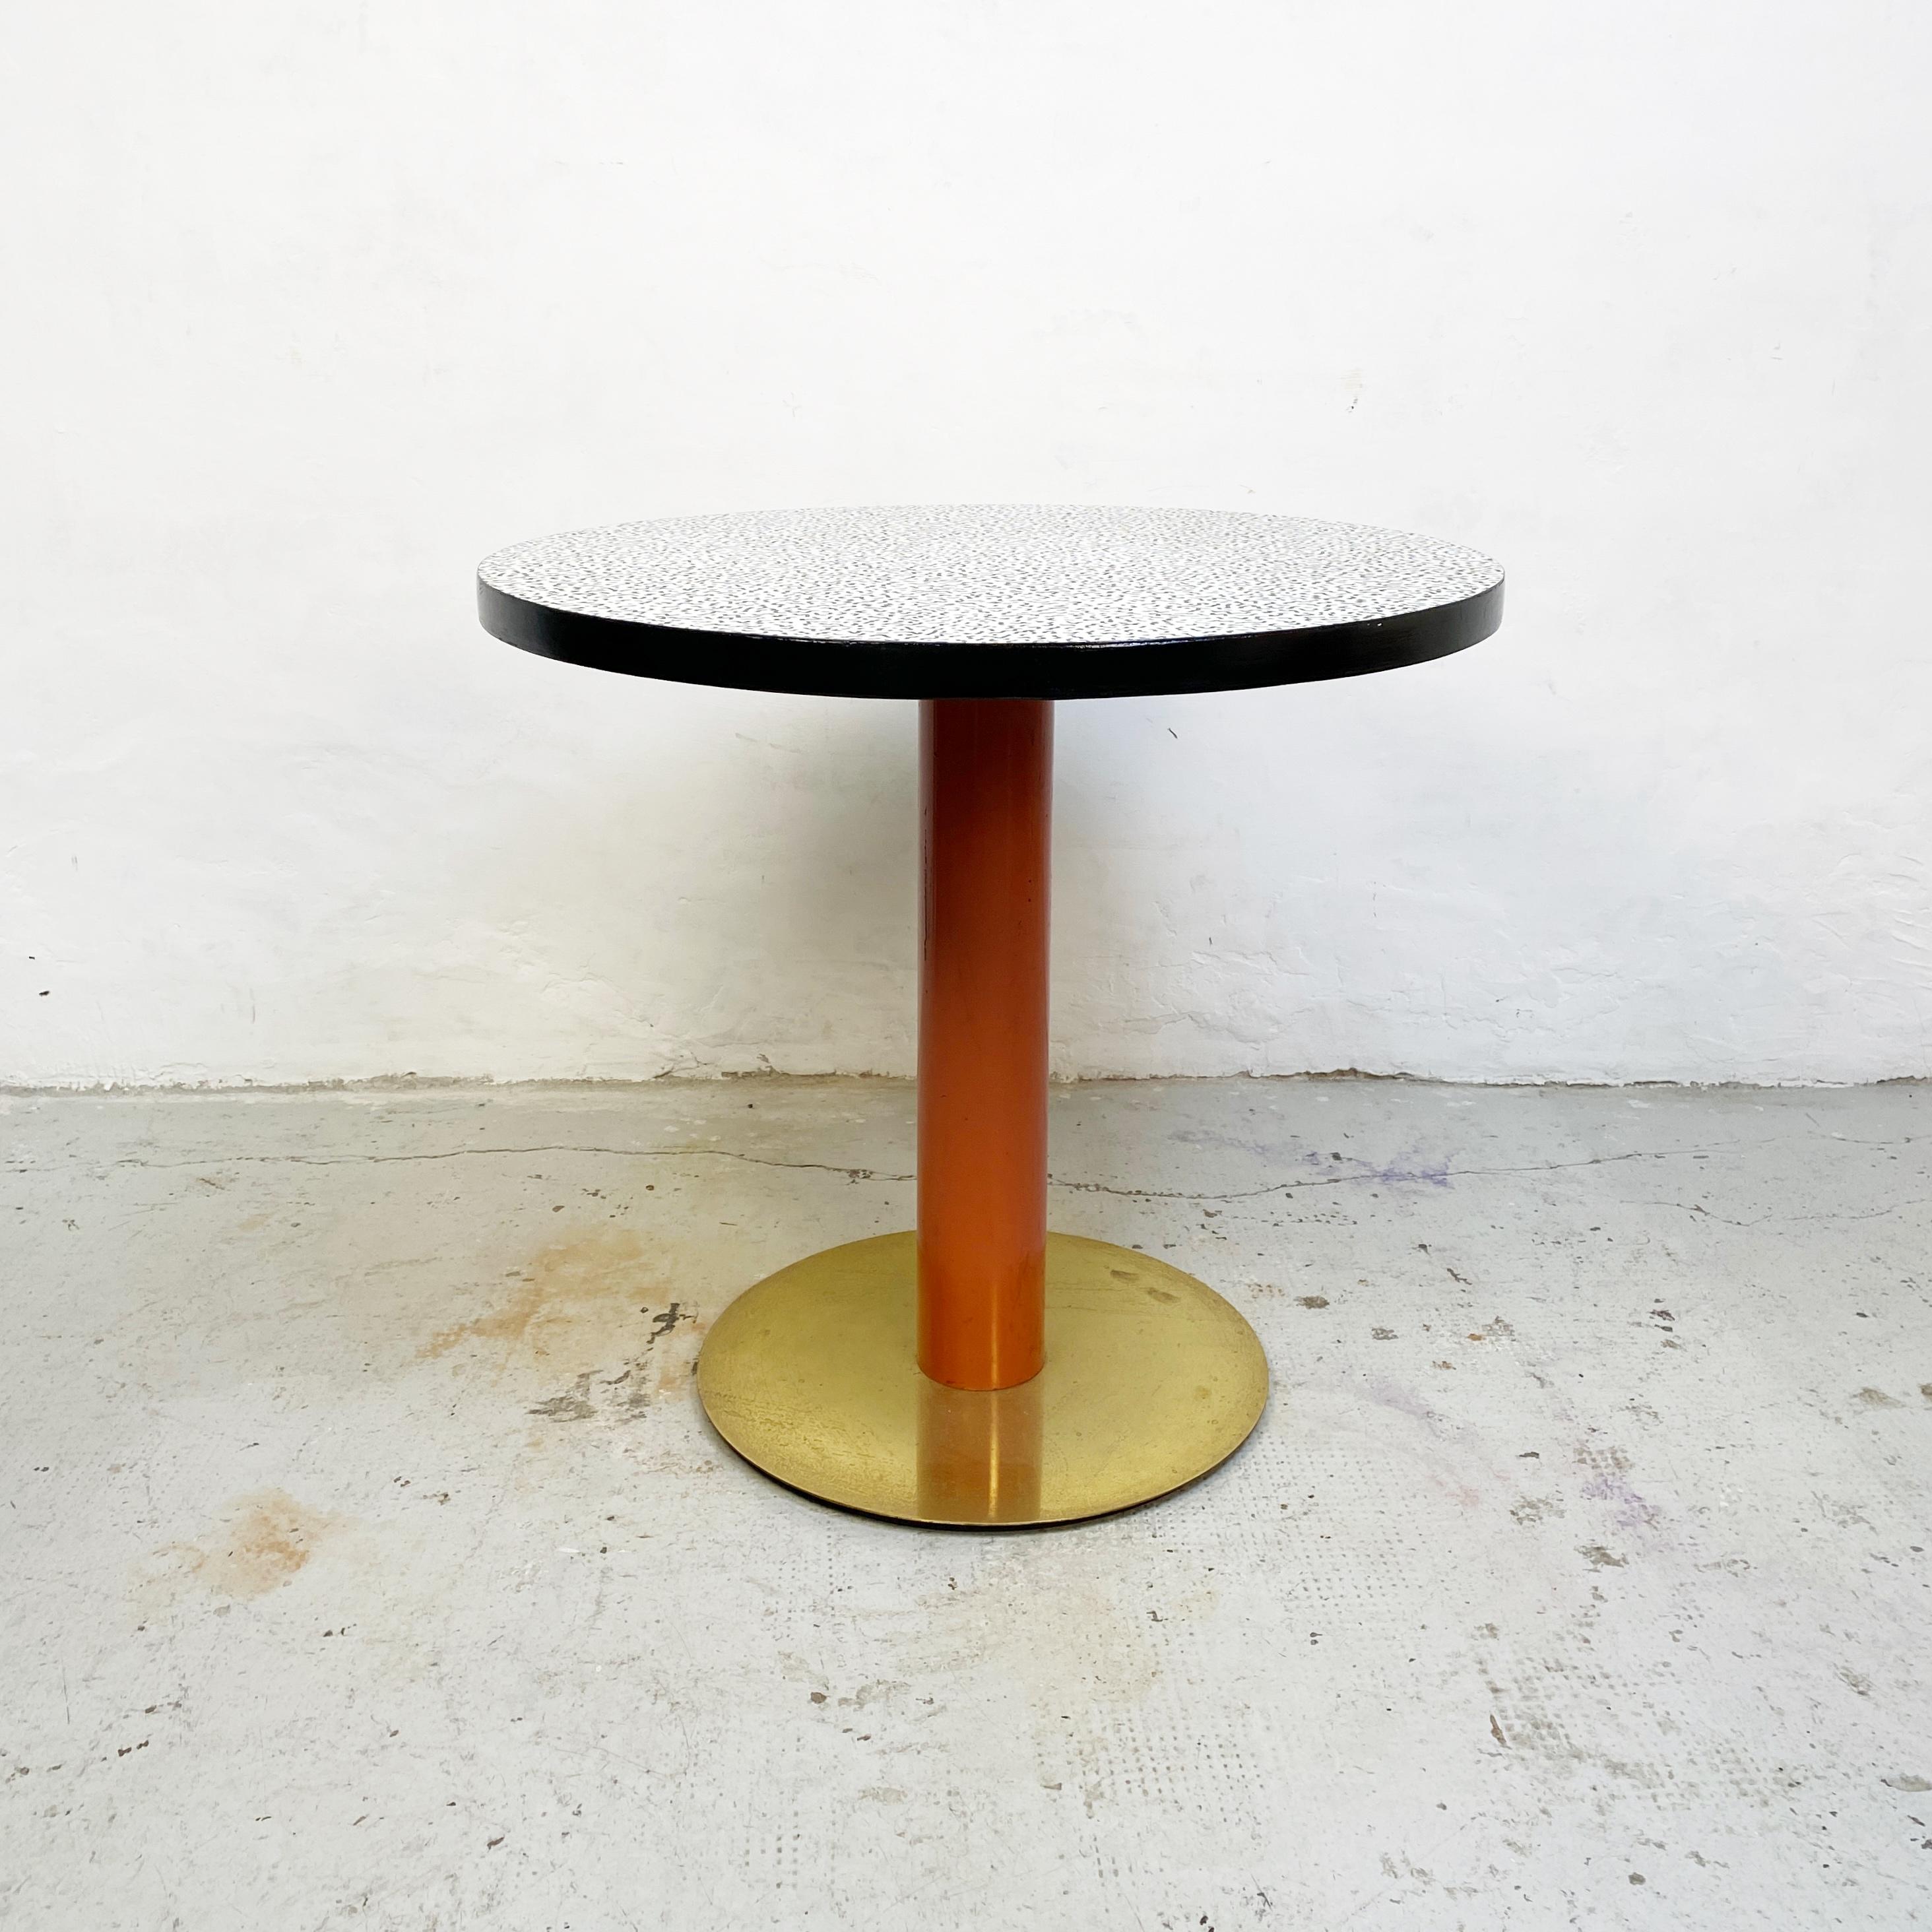 Metal Italian Mid-Century Modern Round Table with Decorative Pattern, 1980s